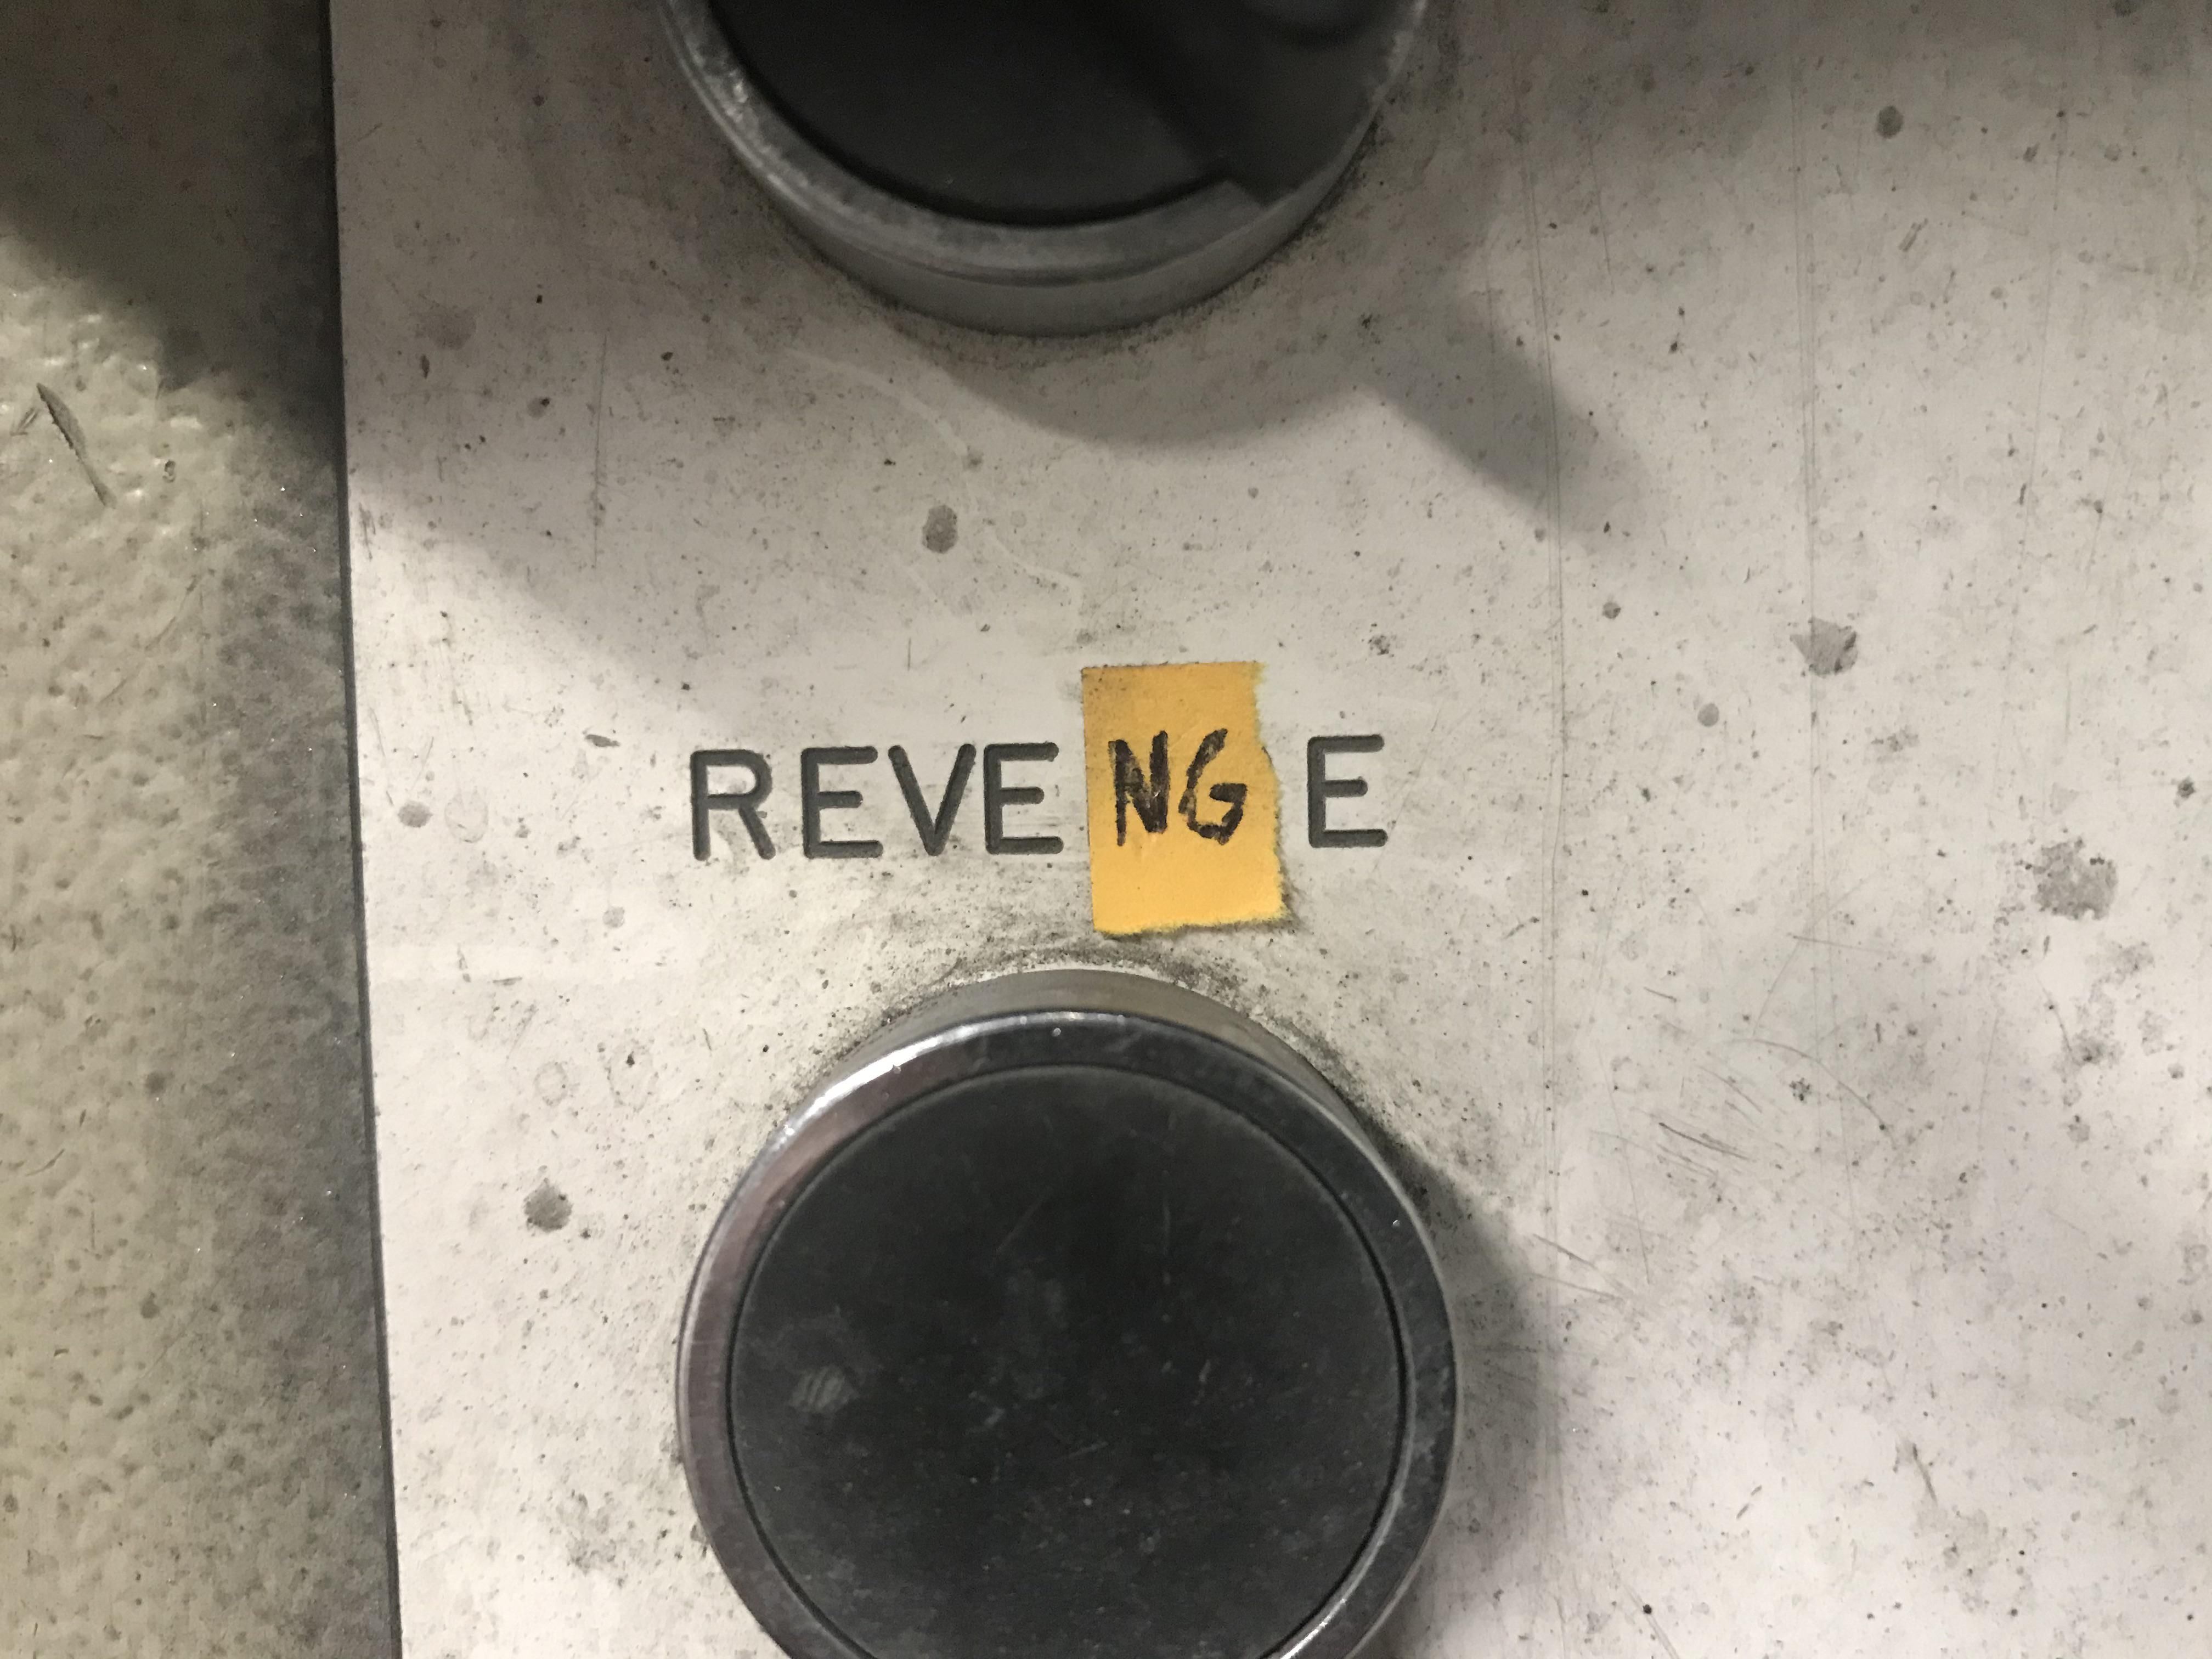 Somebody modified the ‘reverse’ button at work. Honestly I think it’s more useful now